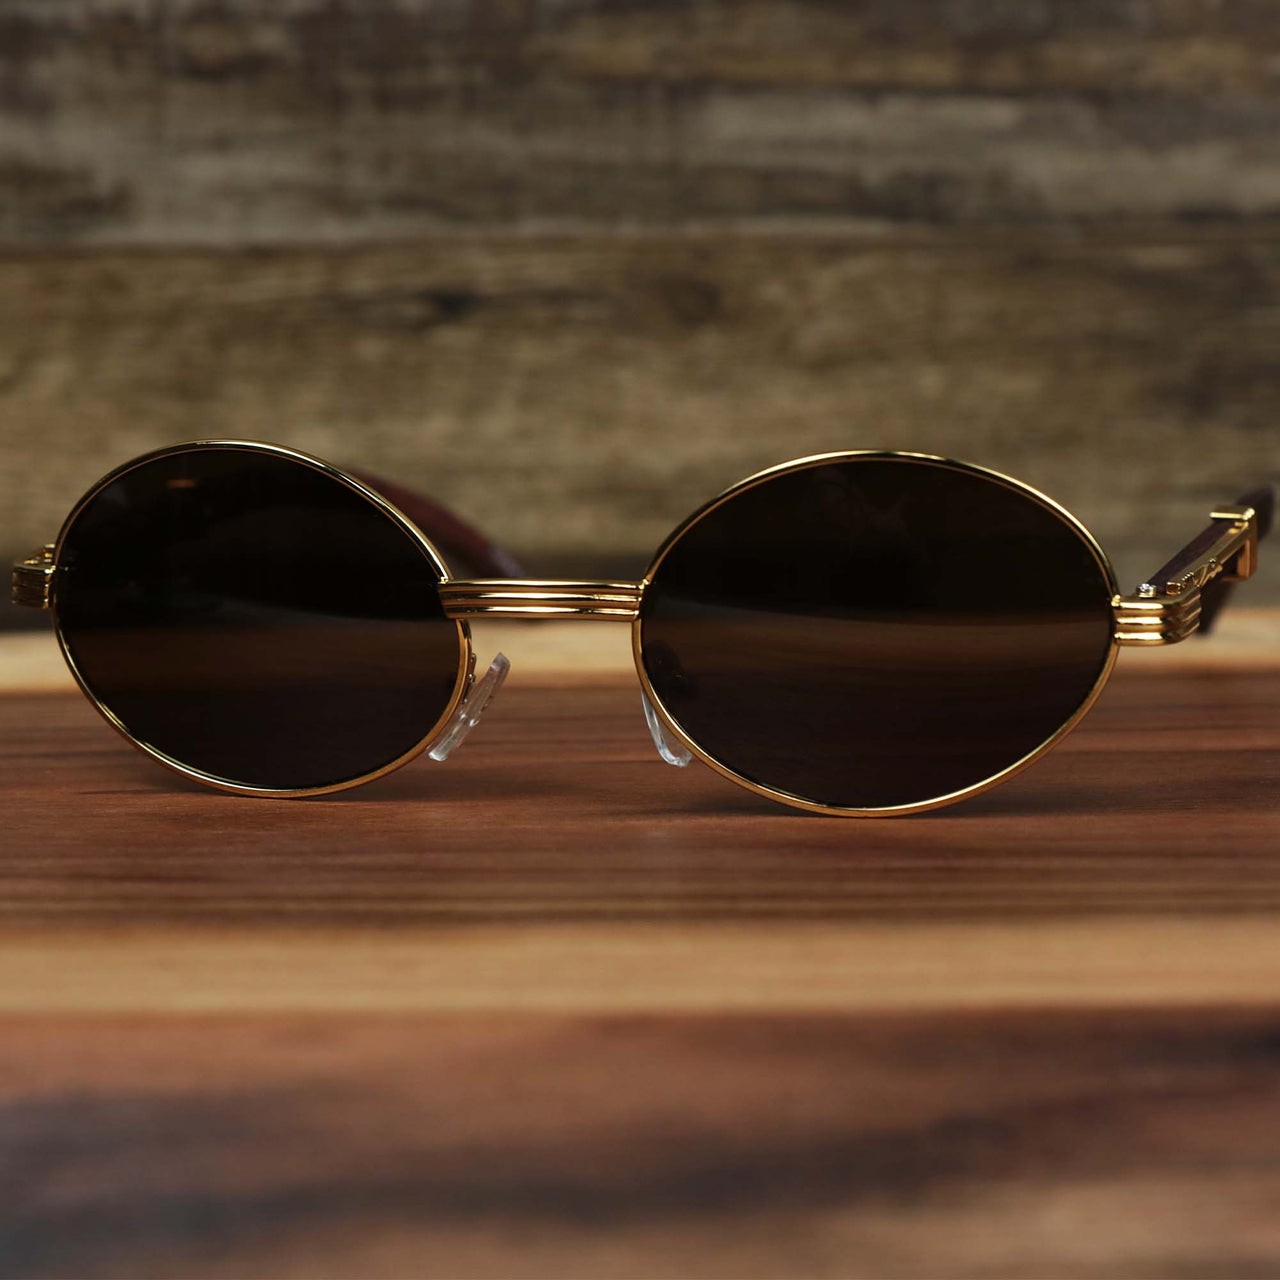 The Oval 3 Row Frame Brown Lens Sunglasses with Gold Frame